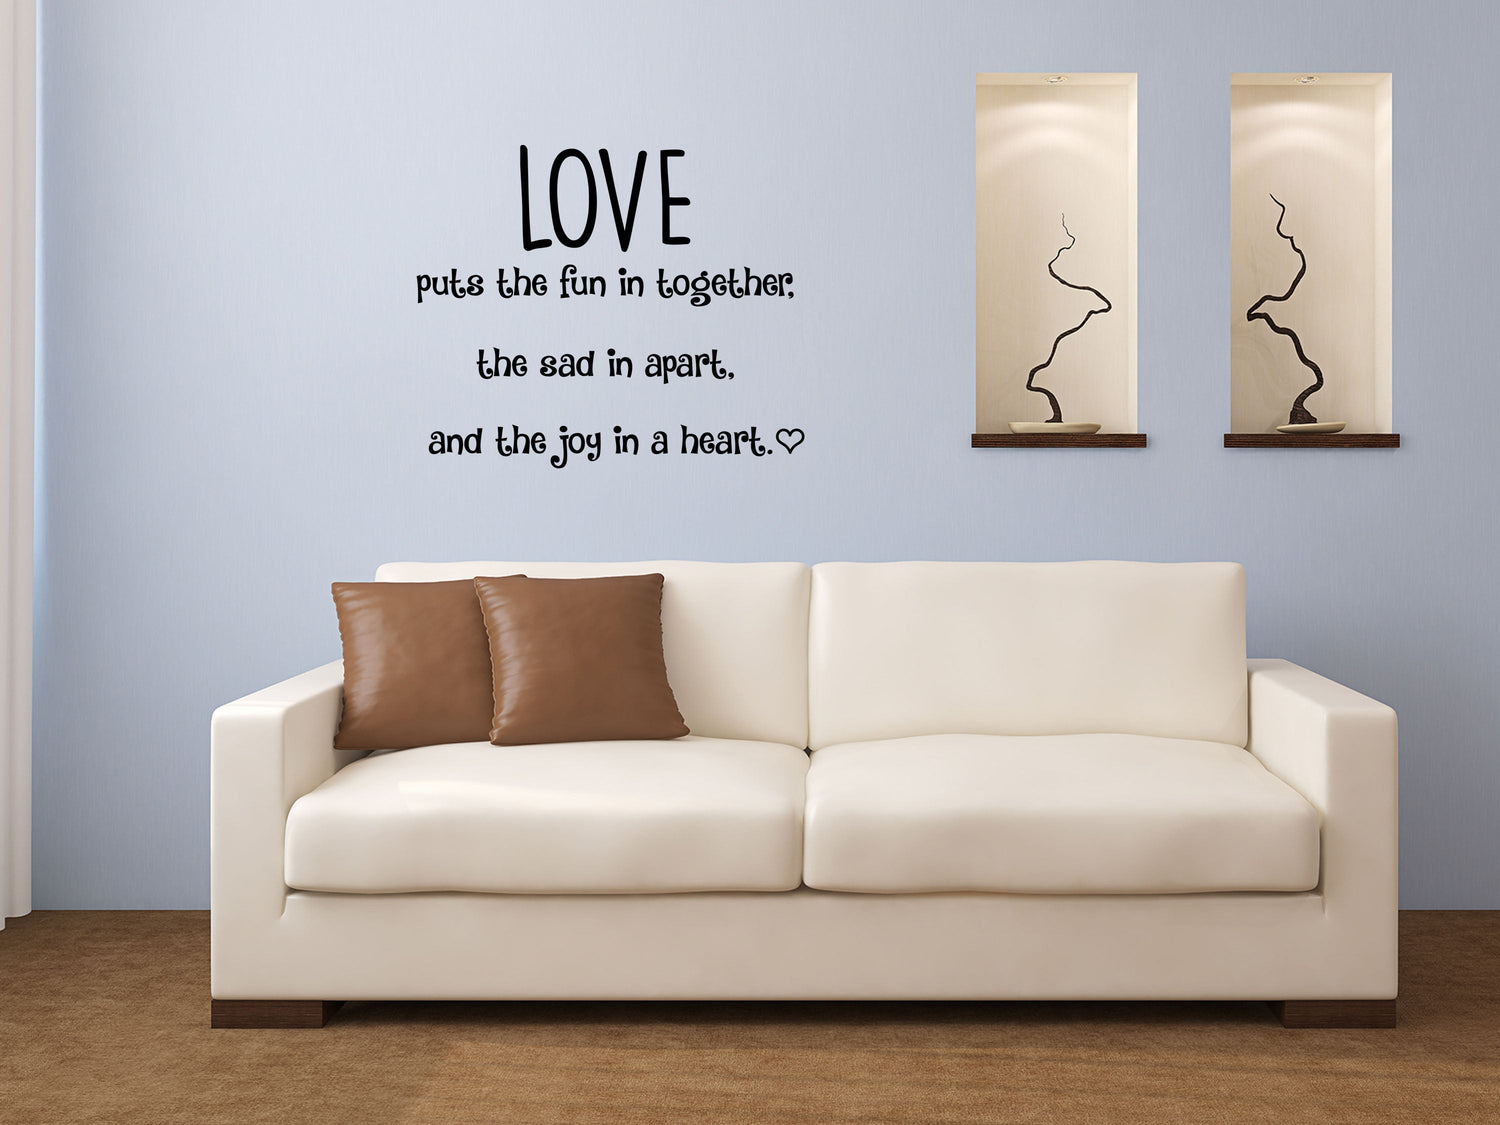 Love Wall Decal - Inspirational Wall Decals Vinyl Wall Decal Inspirational Wall Signs 